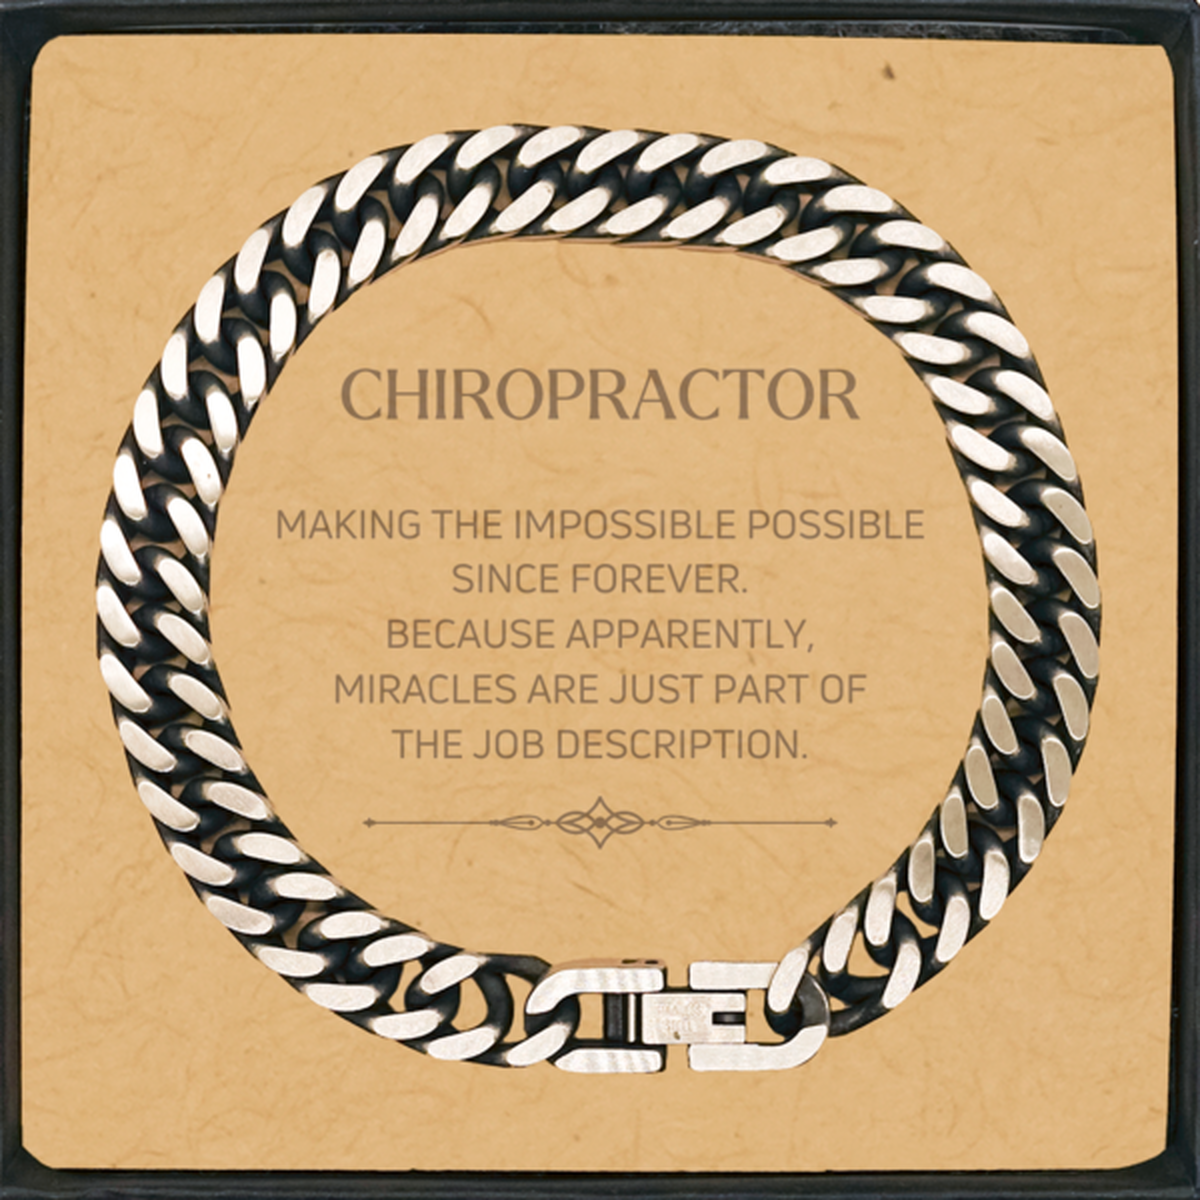 Funny Chiropractor Gifts, Miracles are just part of the job description, Inspirational Birthday Cuban Link Chain Bracelet For Chiropractor, Men, Women, Coworkers, Friends, Boss